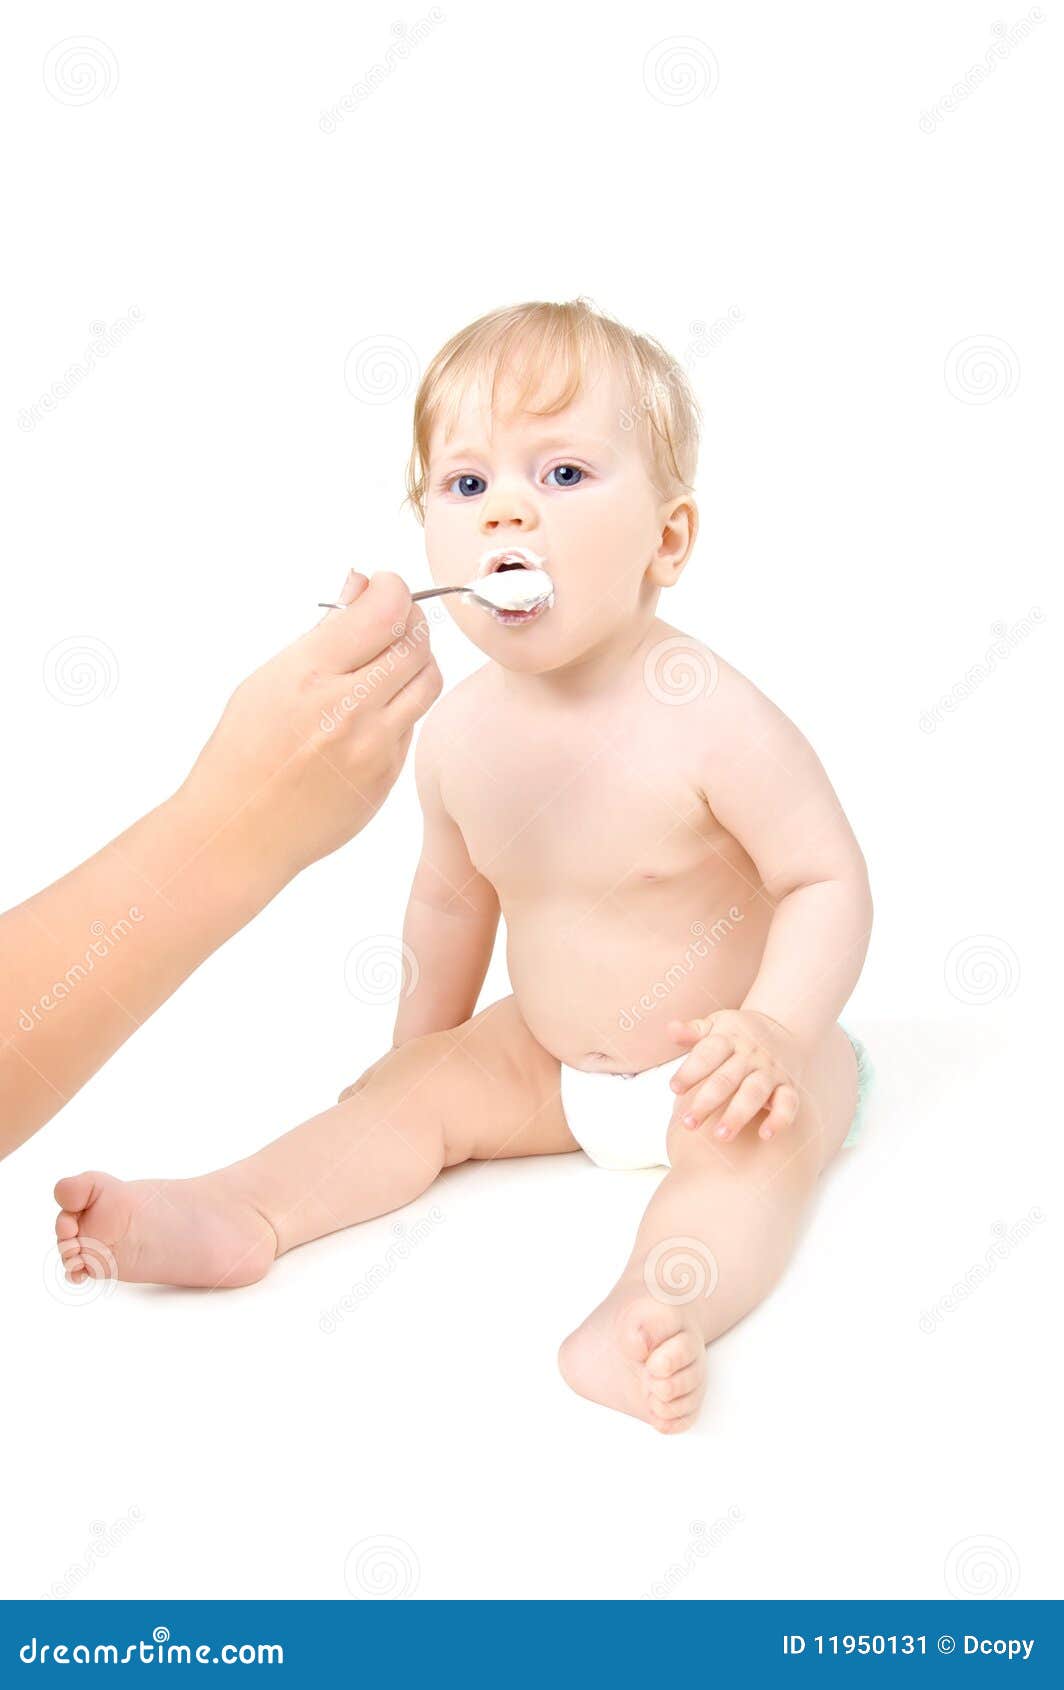 Baby Eating Cottage Cheese Or Yogurt Stock Image Image Of Cheese